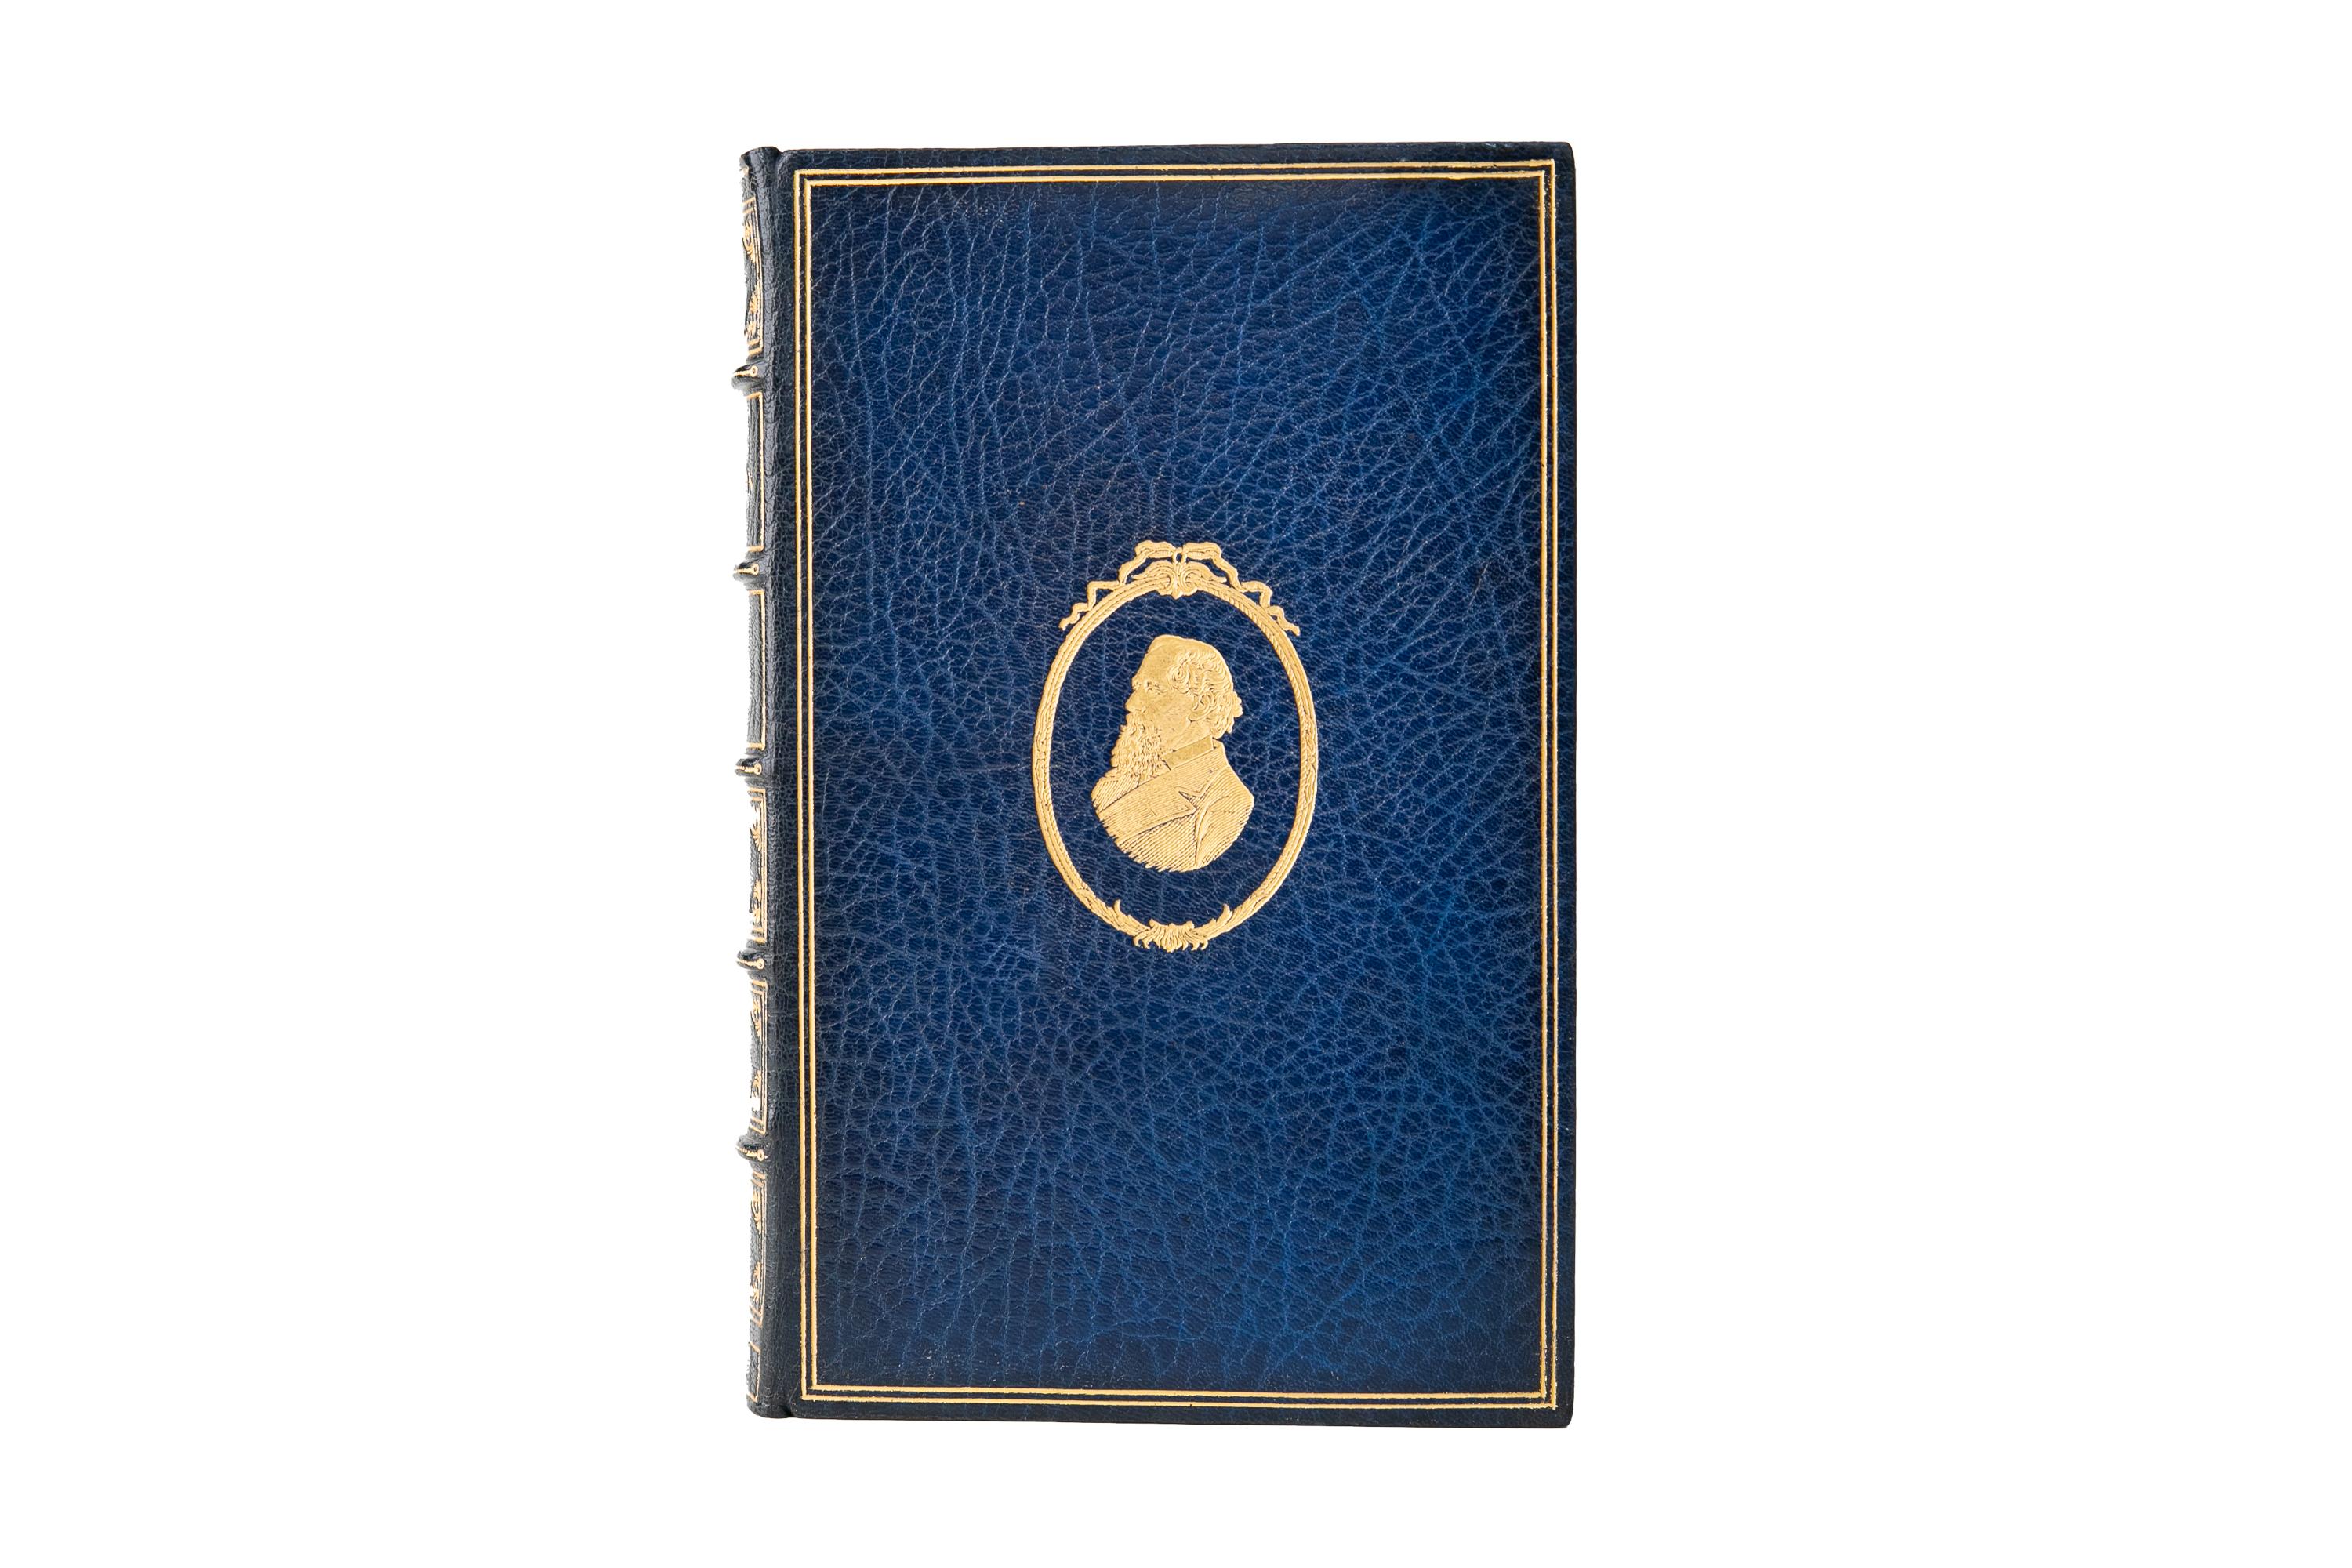 1 Volume. Charles Dickens, Dombey & Son. First Edition. Bound by Bayntun in full blue morocco with the covers and raised band spine gilt-tooled. All edges gilt with gilt-tooled turn-ins and marbled endpapers. Illustrated. Published by Bradbury &